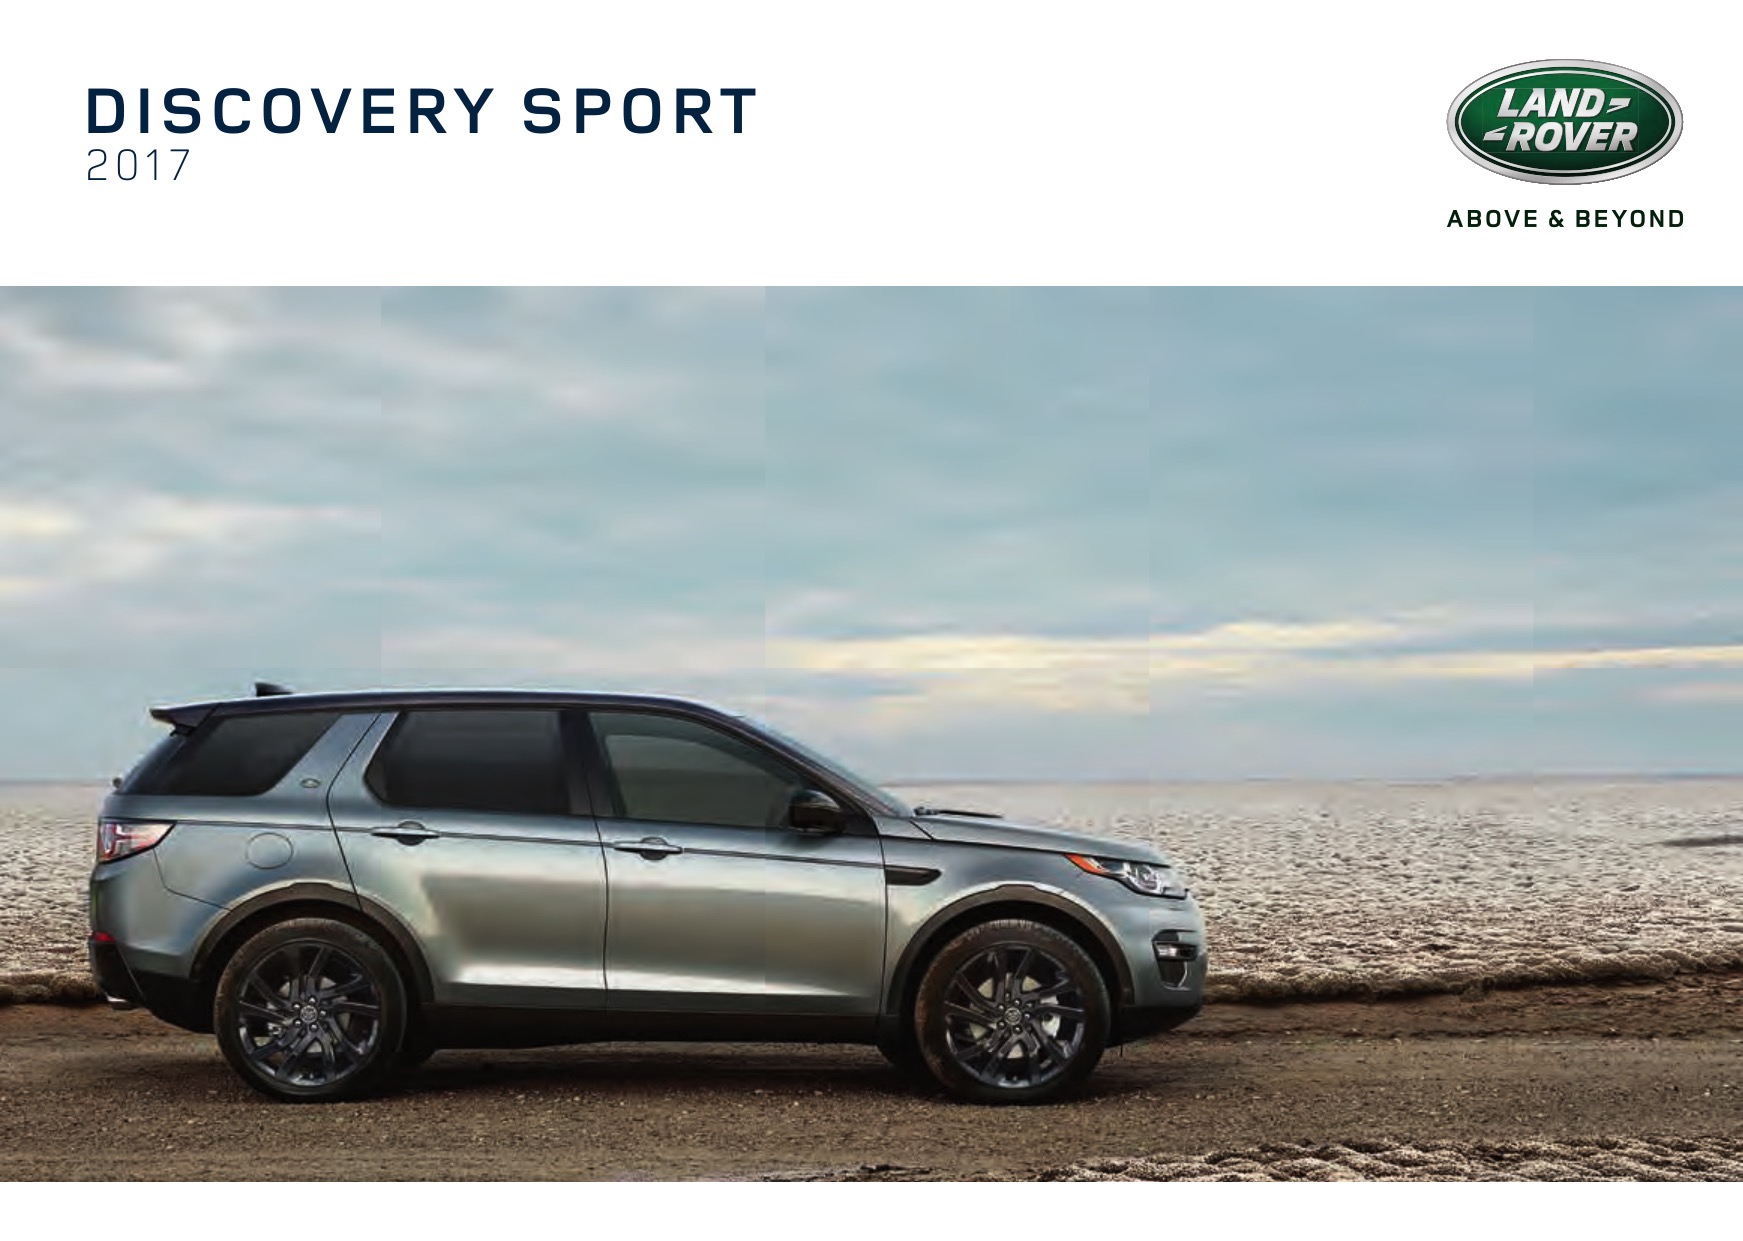 2017 Land Rover Discovery Sport Brochure Page 10